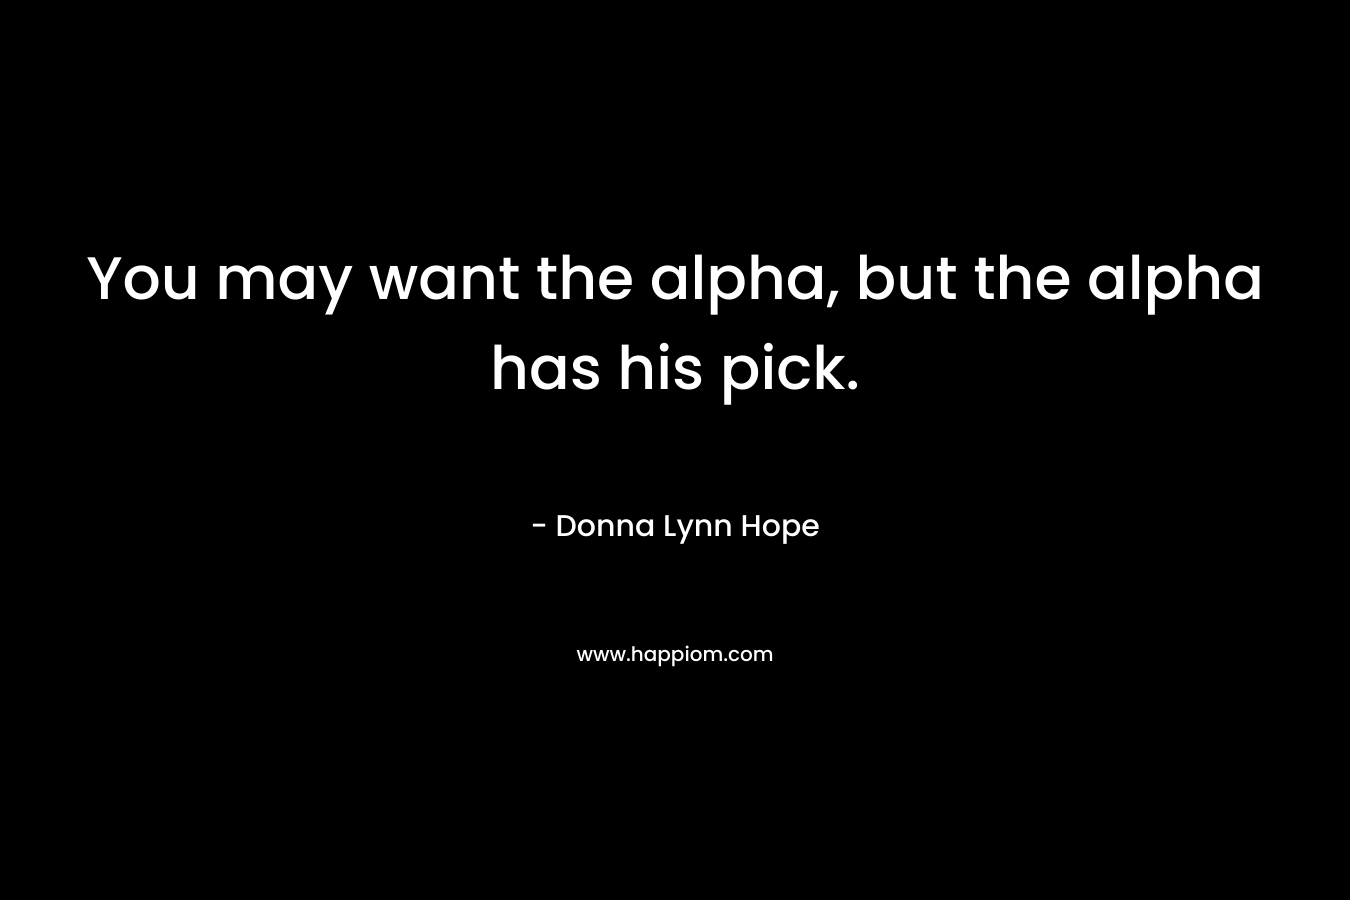 You may want the alpha, but the alpha has his pick. – Donna Lynn Hope